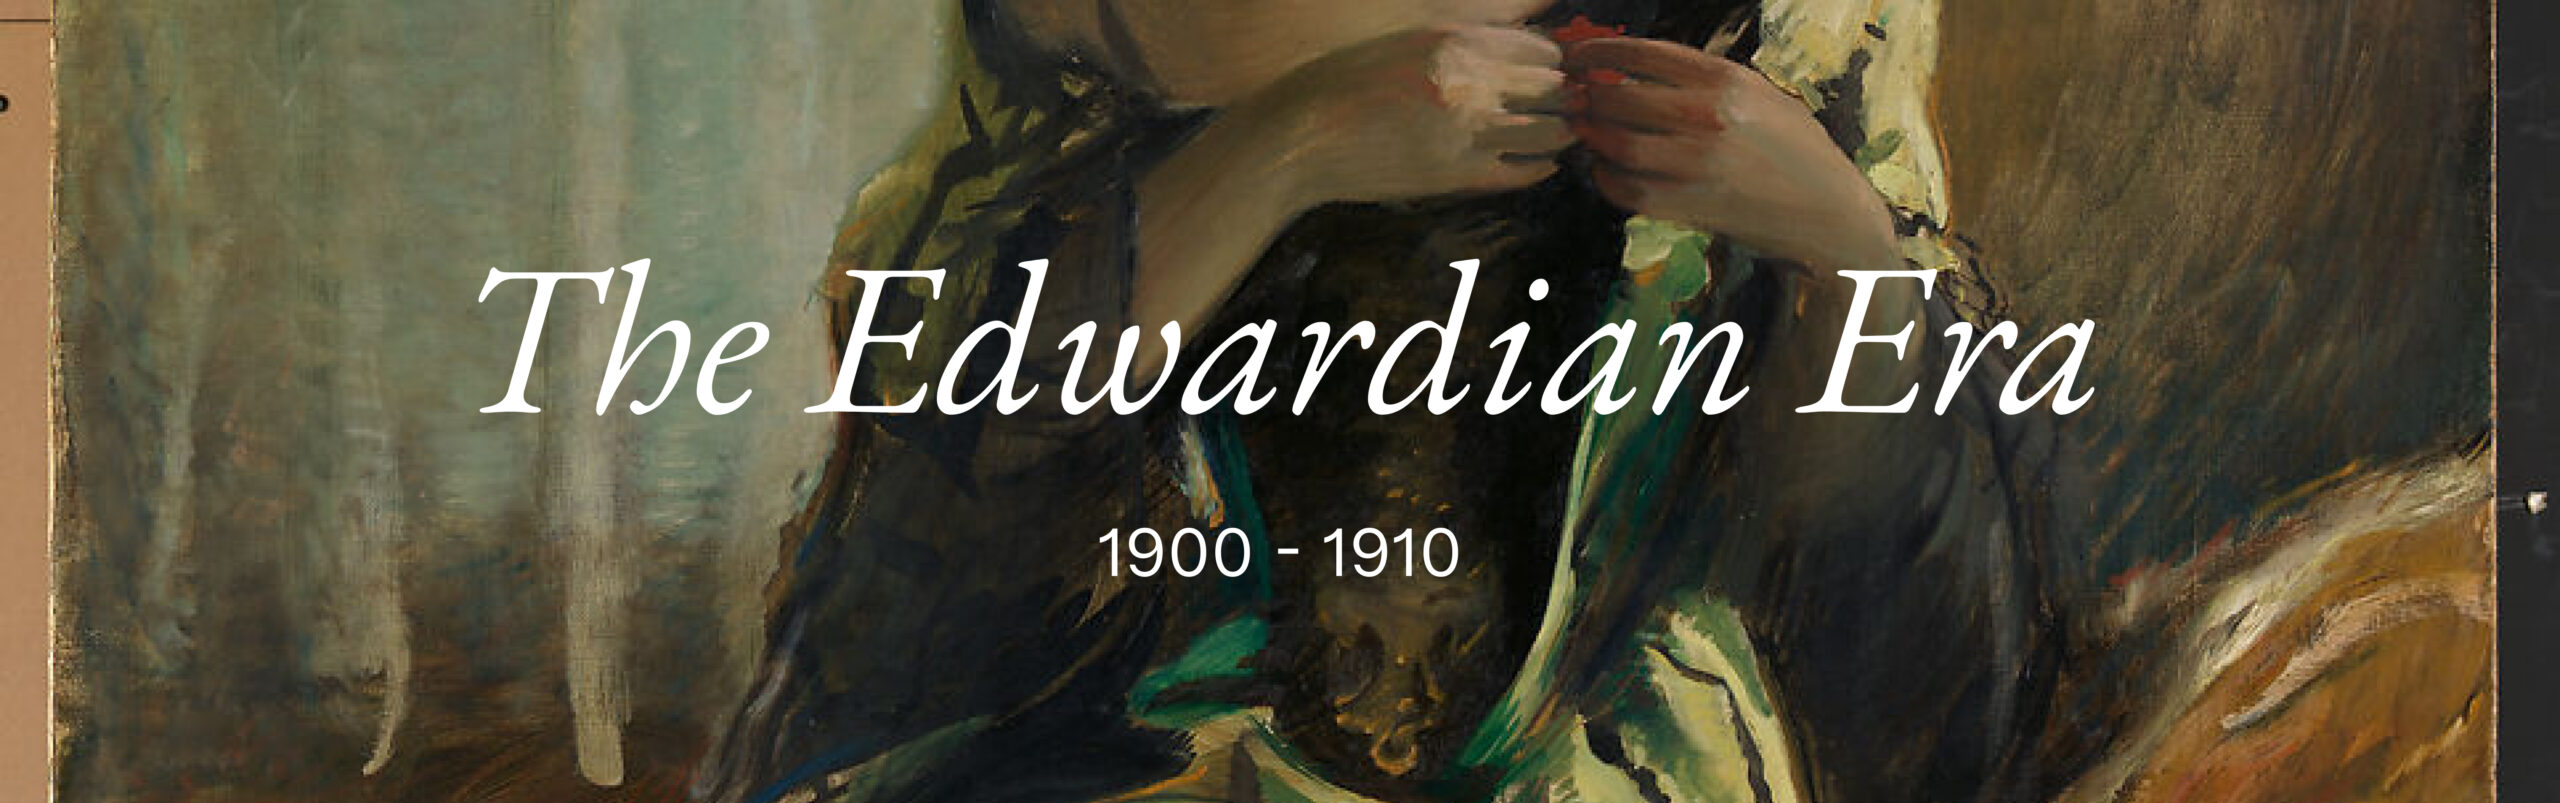 cropped photo of an Oil painting of woman wearing a green and black dress. Her hands are shown. White text set on top of photo that reads "The Edwardian Era" followed by "1900 - 1910"